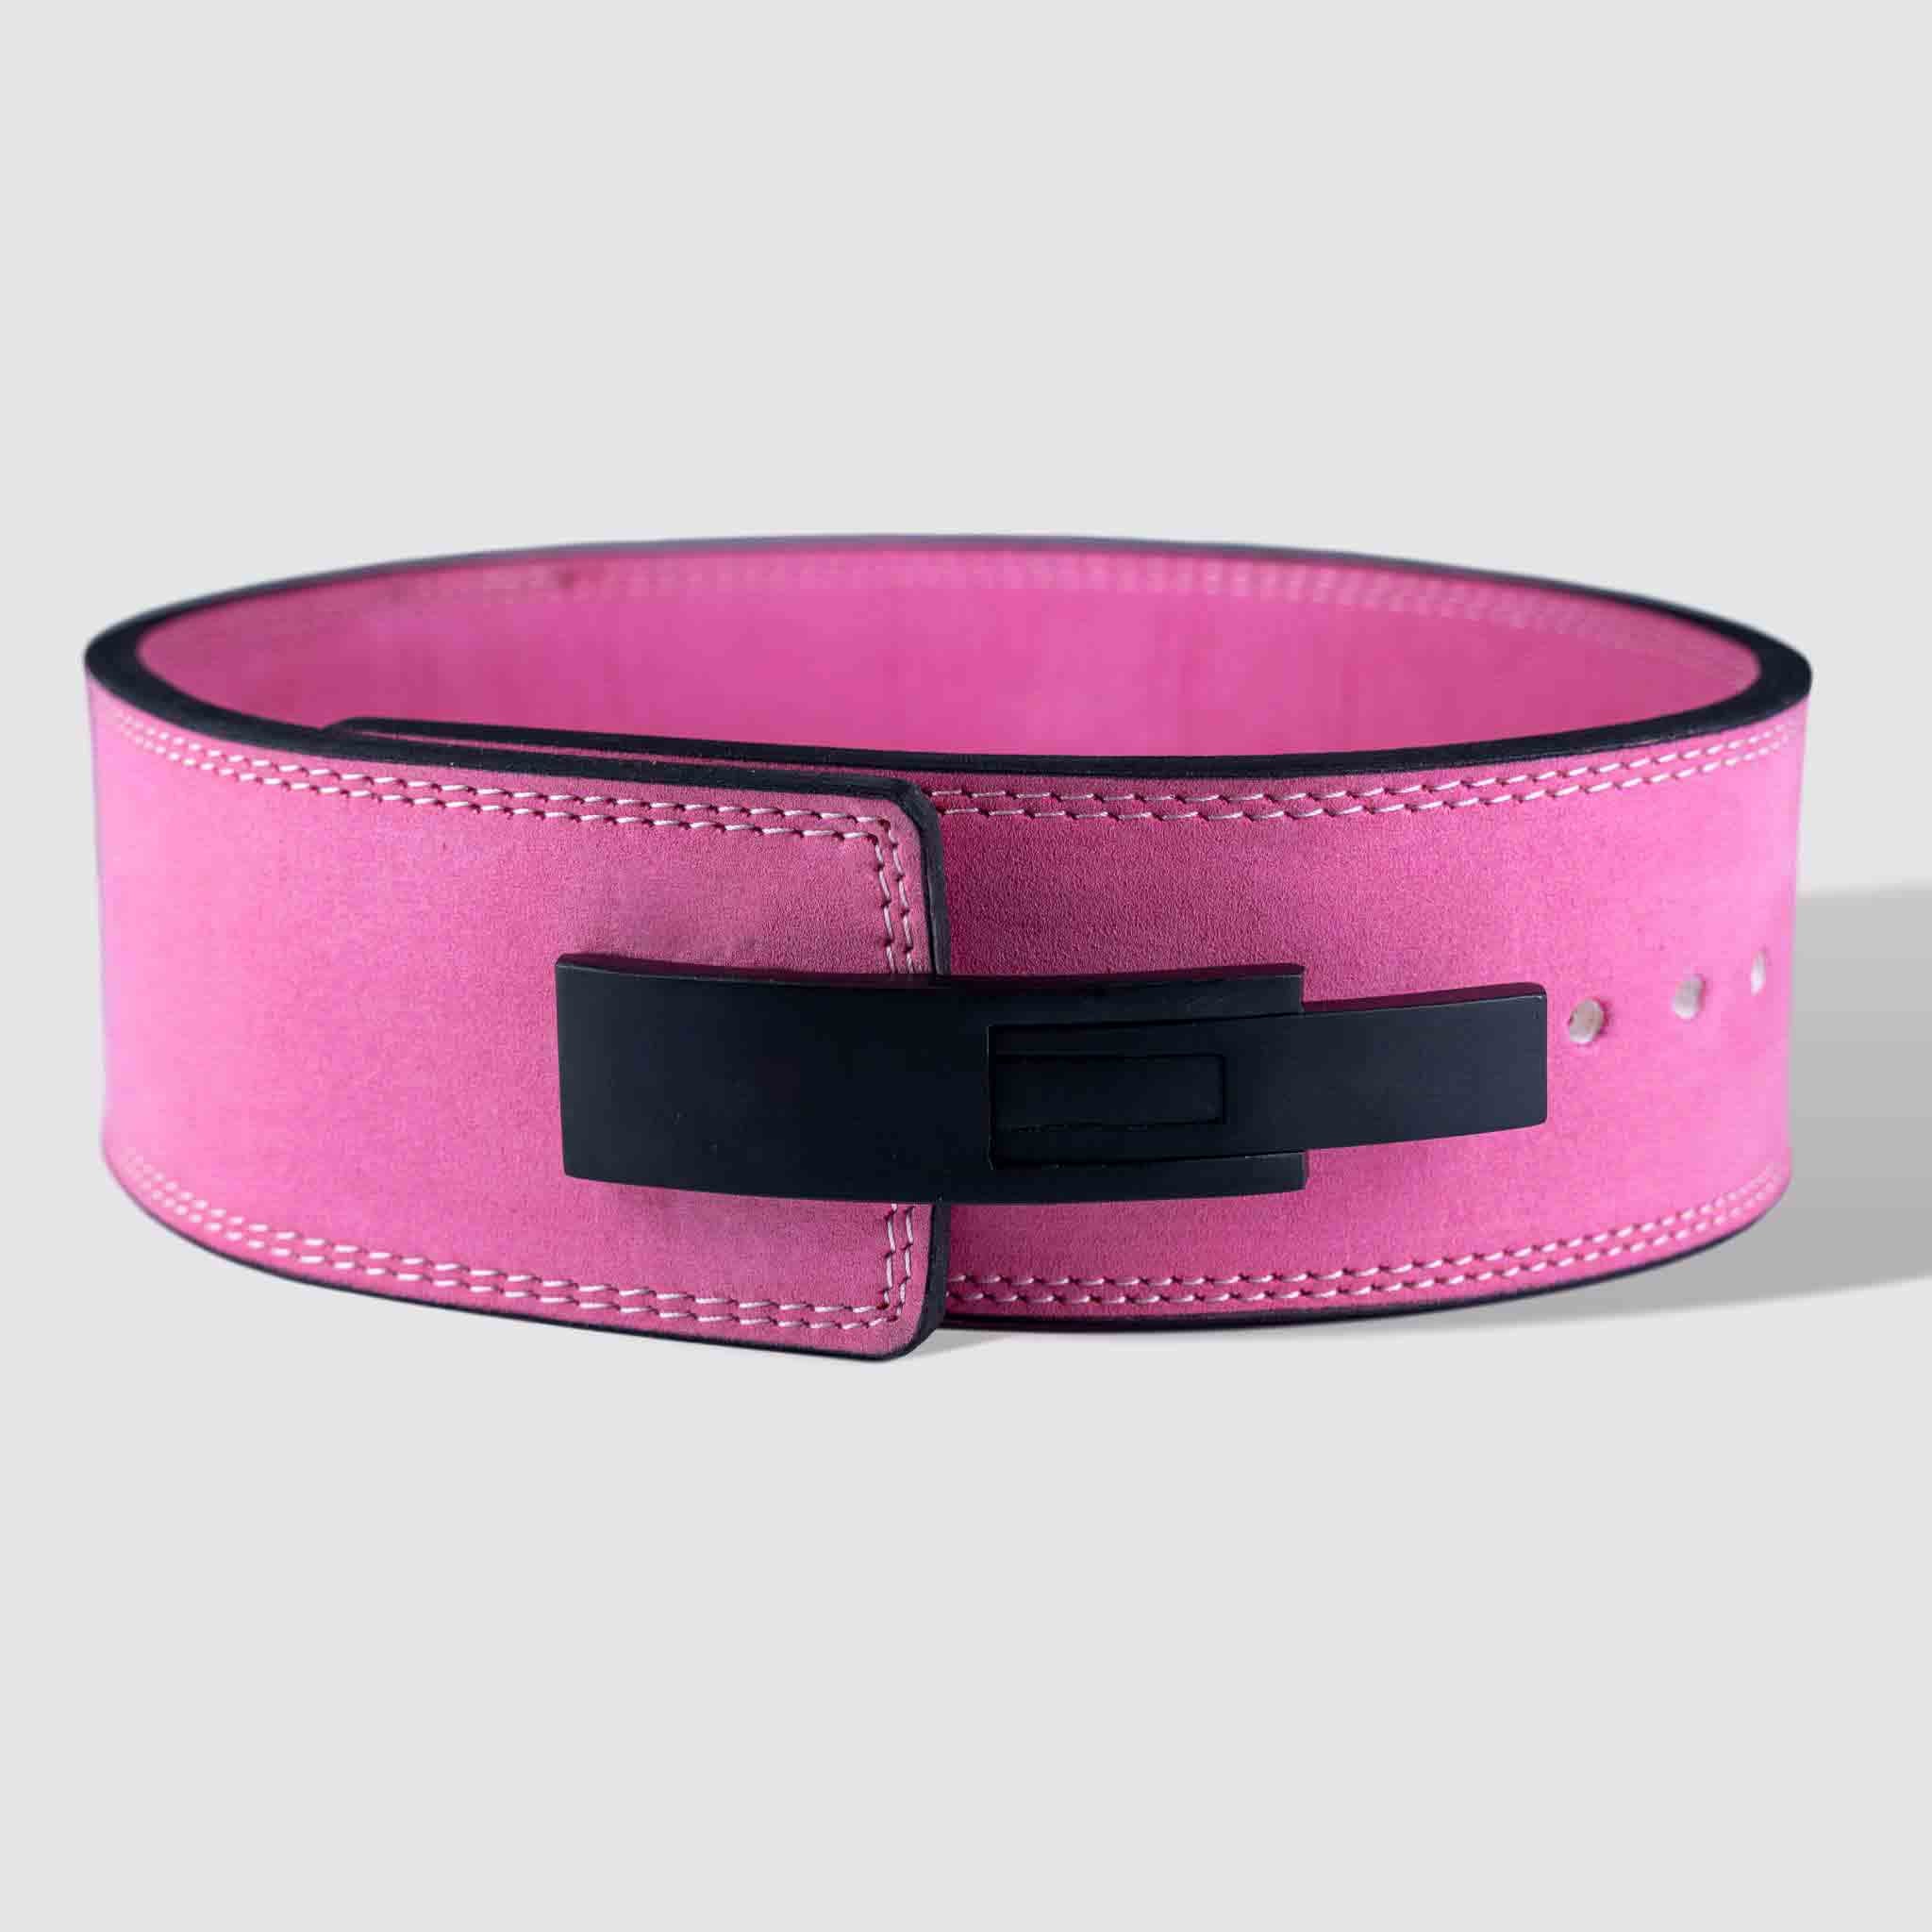 Weight Lifting Belts and Powerlifting Belts